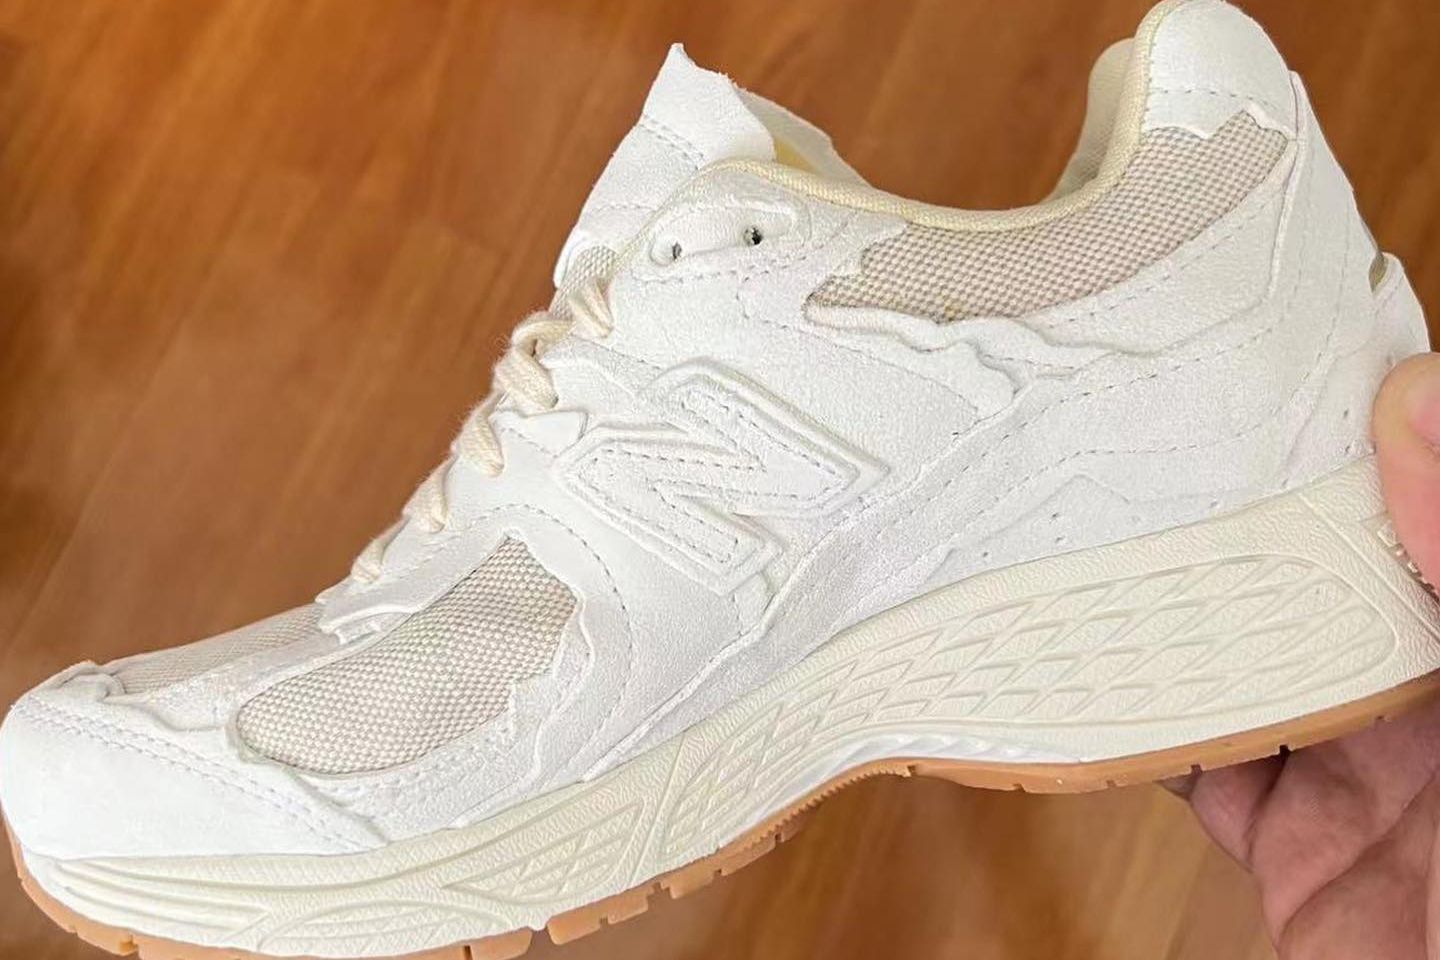 New Balance 2002R 'Protection Pack' White/Gum